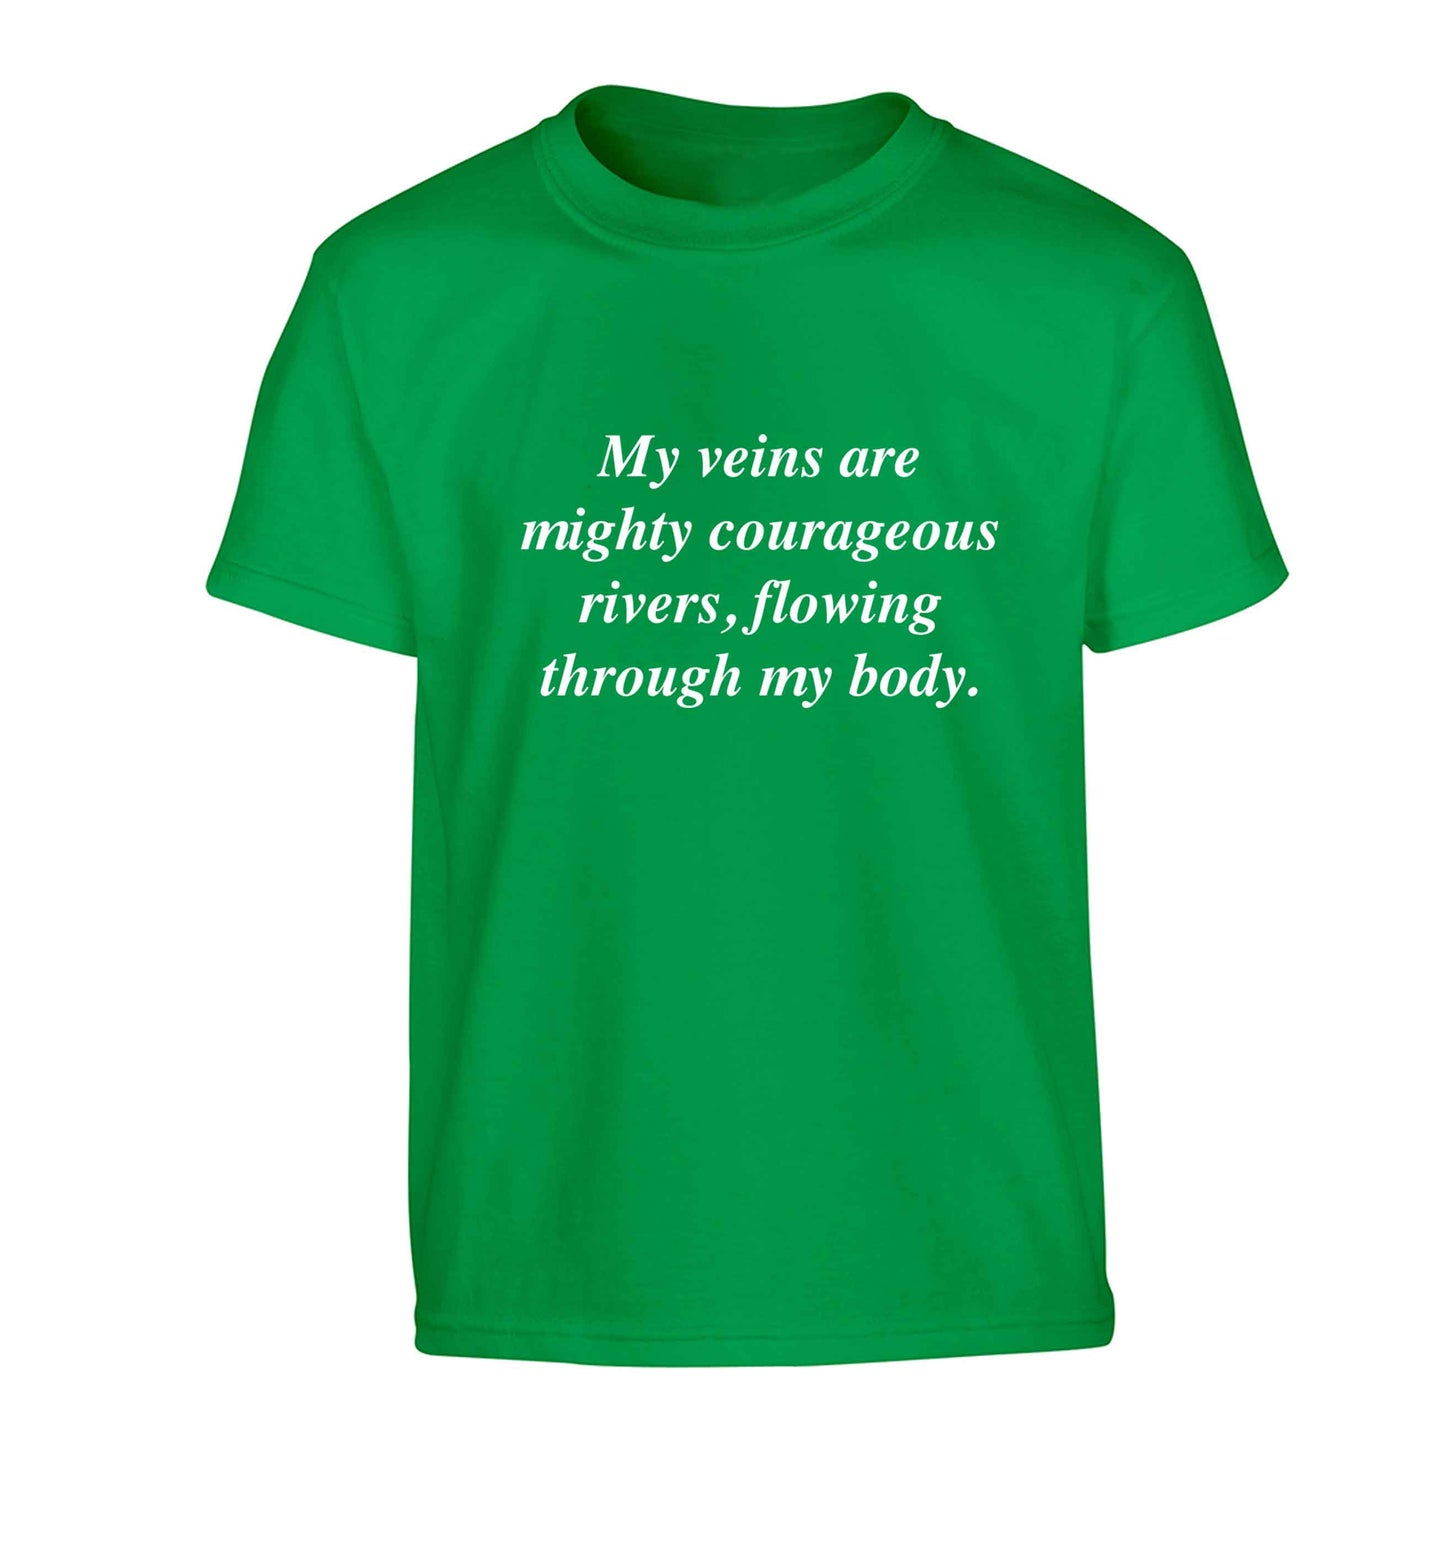 My veins are mighty courageous rivers, flowing through my body Children's green Tshirt 12-13 Years